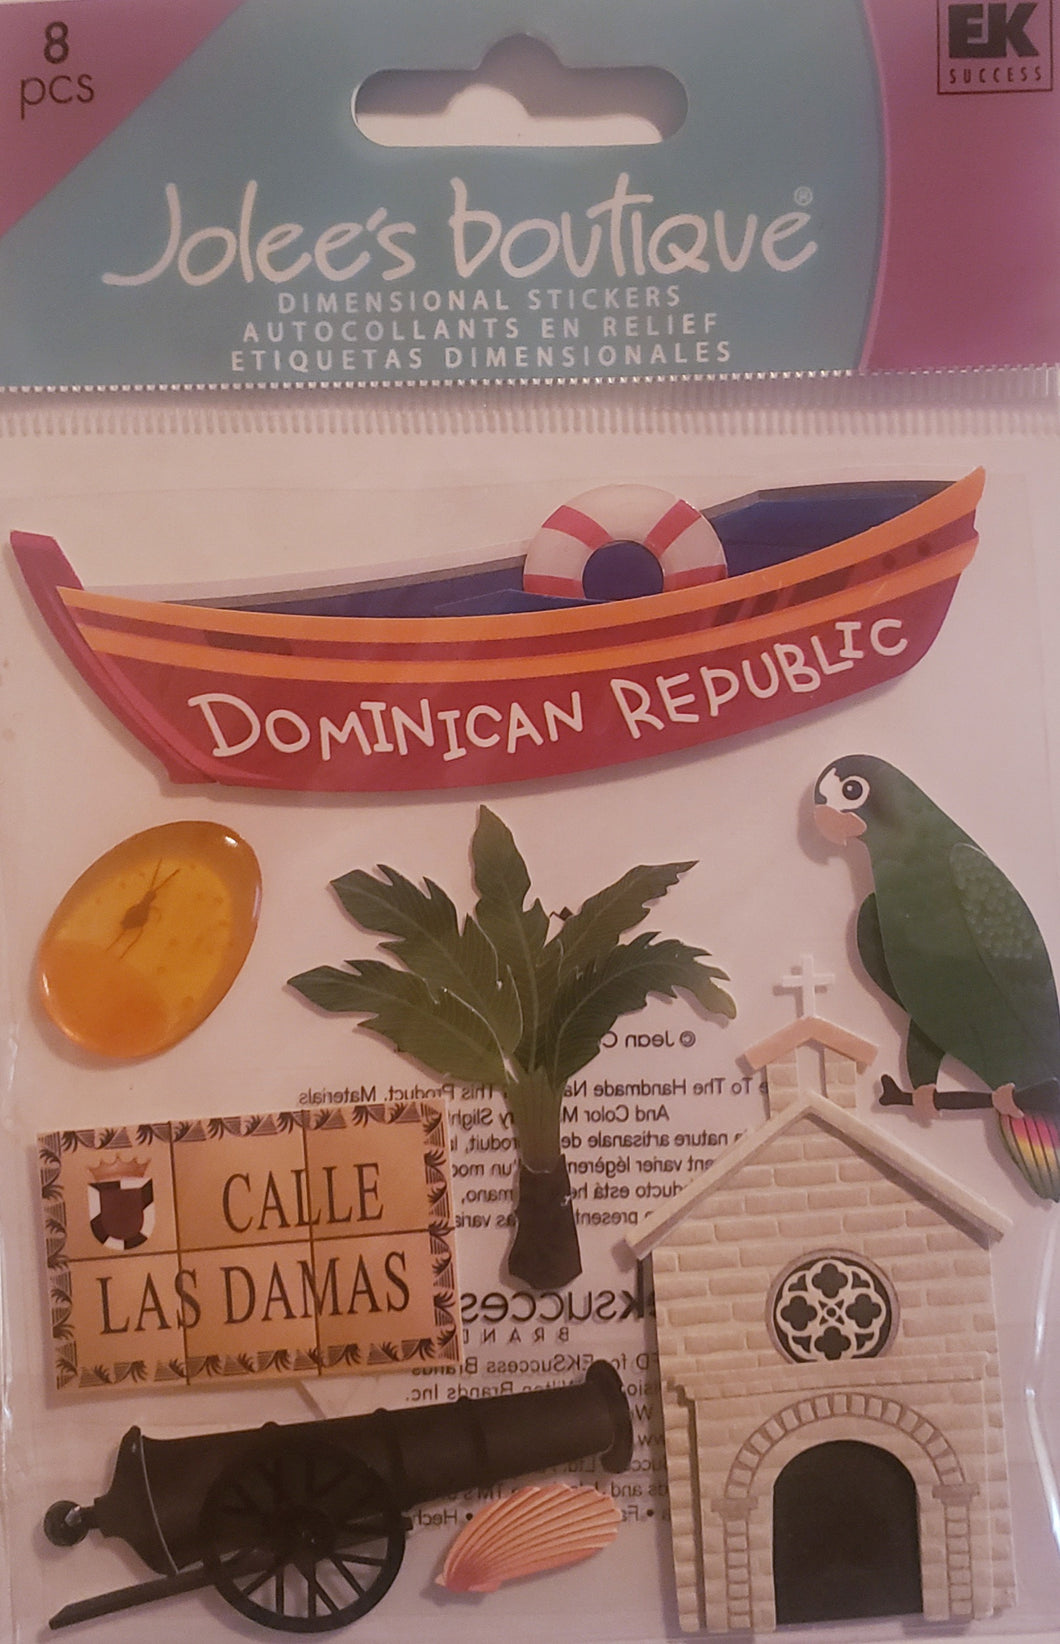 Jolee's Boutique Dimensional Sticker  - small pack country - Dominican Republic